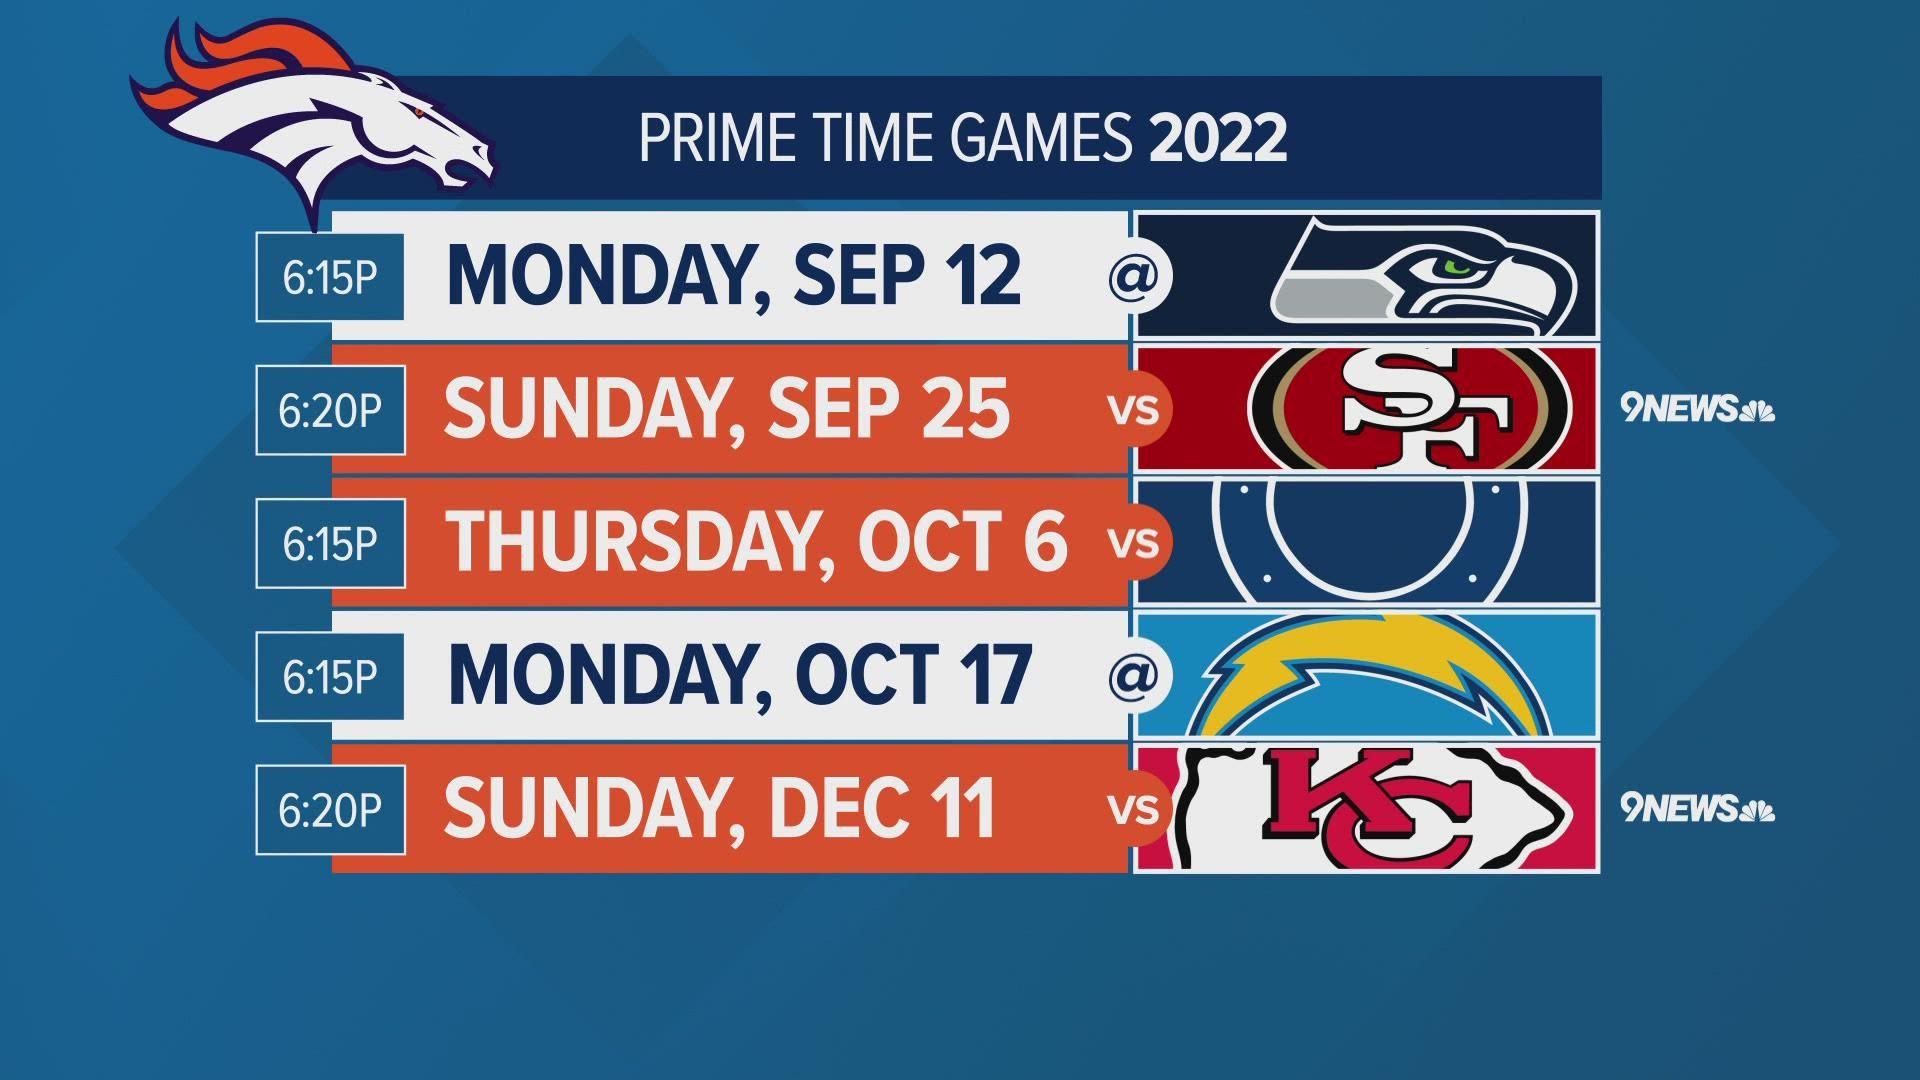 Five primetime games are on the Denver Broncos’ 2022 schedule, or four more than their initial schedule from 2021.